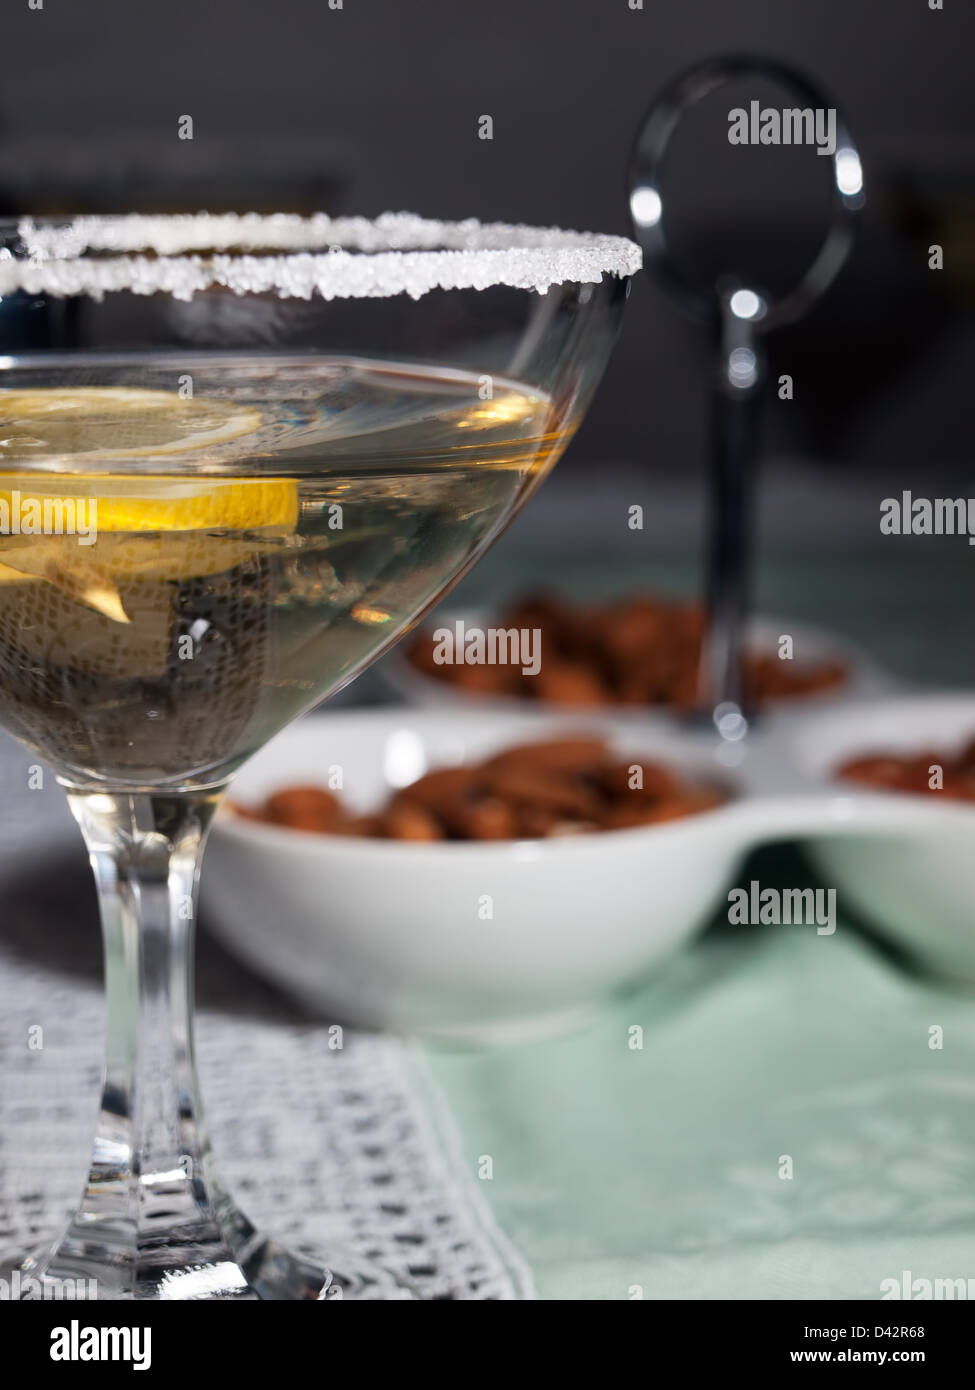 Aperitif drink like a martini with sugar rim on the glass. Stock Photo